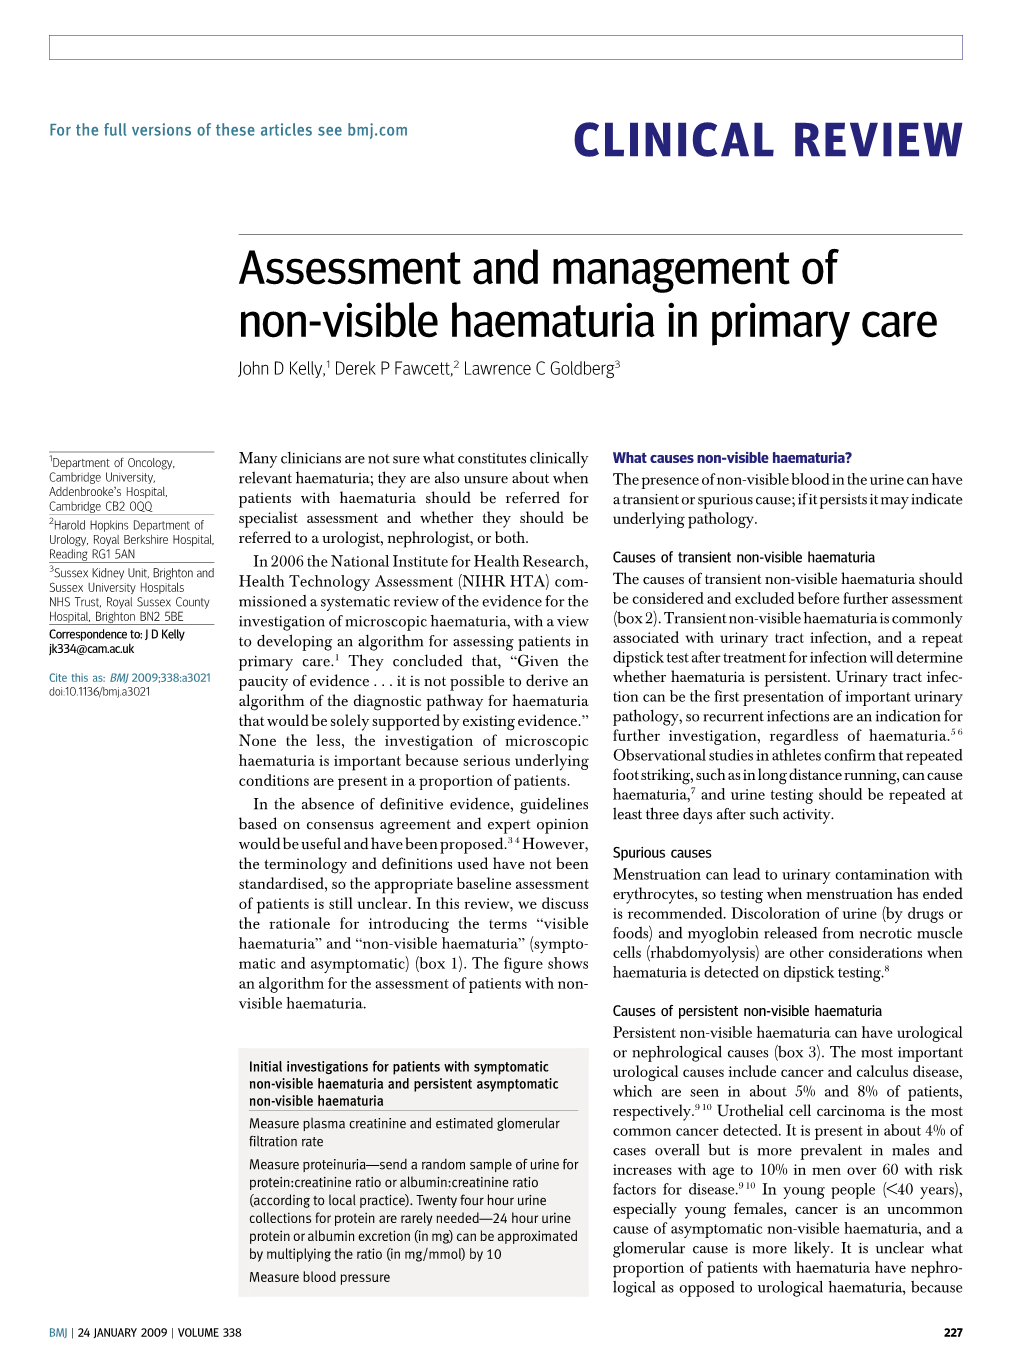 Assessment and Management of Non-Visible Haematuria in Primary Care John D Kelly,1 Derek P Fawcett,2 Lawrence C Goldberg3